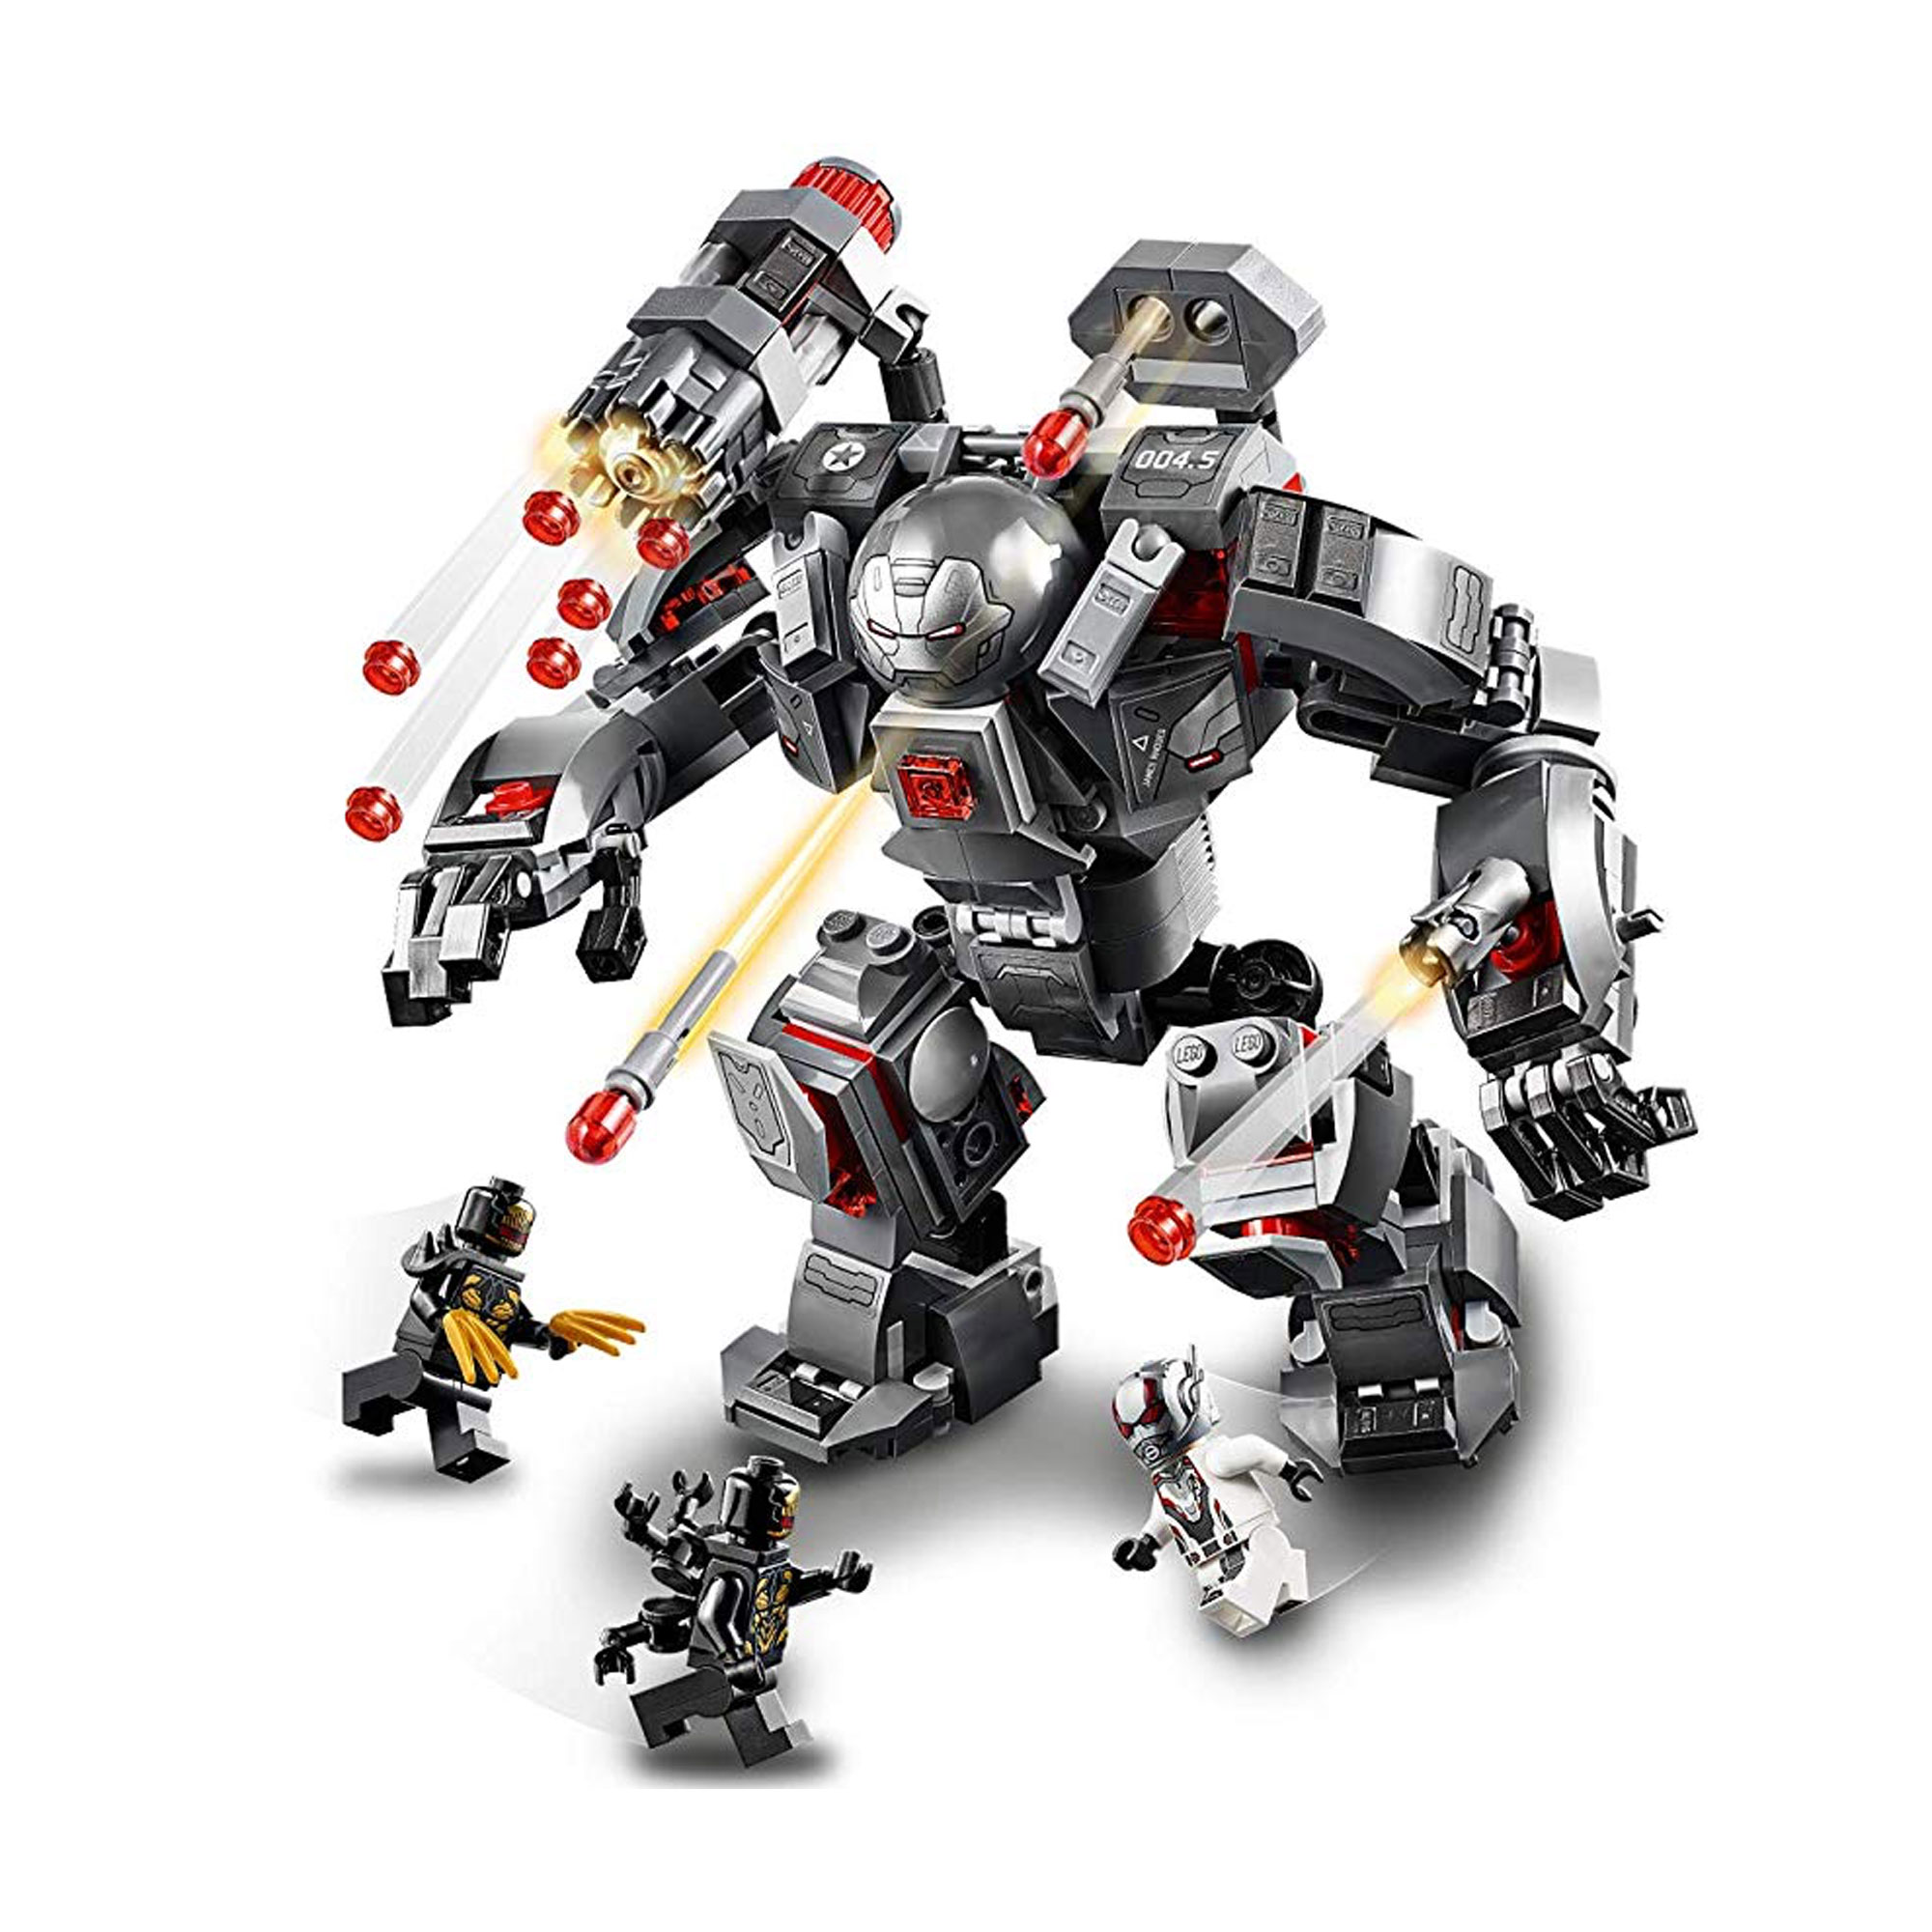 LEGO Marvel Avengers War Machine Buster 76124 Building Kit (362 Pieces) - image 4 of 8